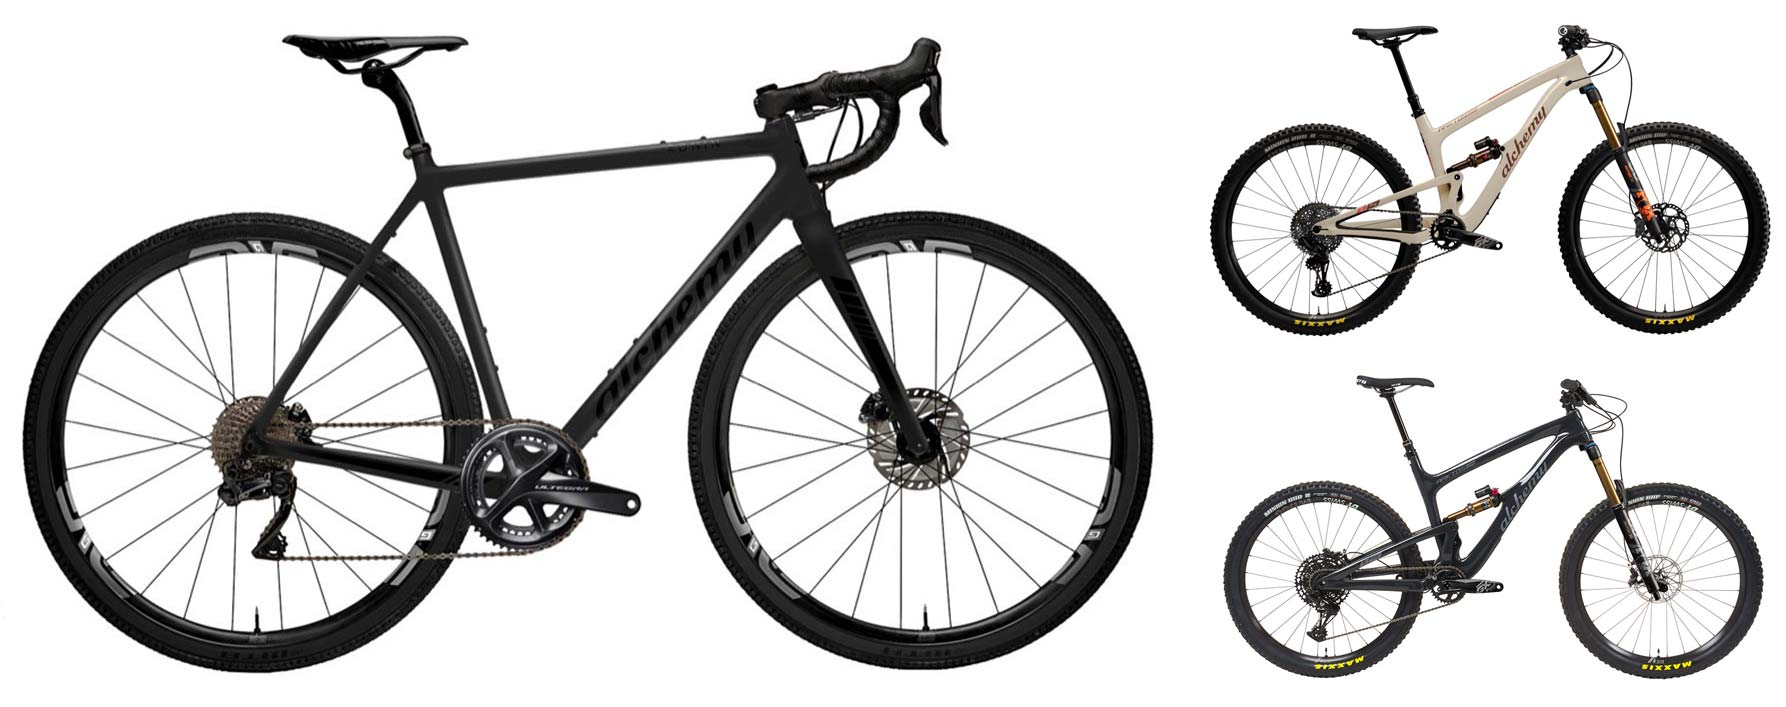 save 1000 to 1500 dollars on a new alchemy road gravel or mountain bike with their roll into summer sale for memorial day 2020